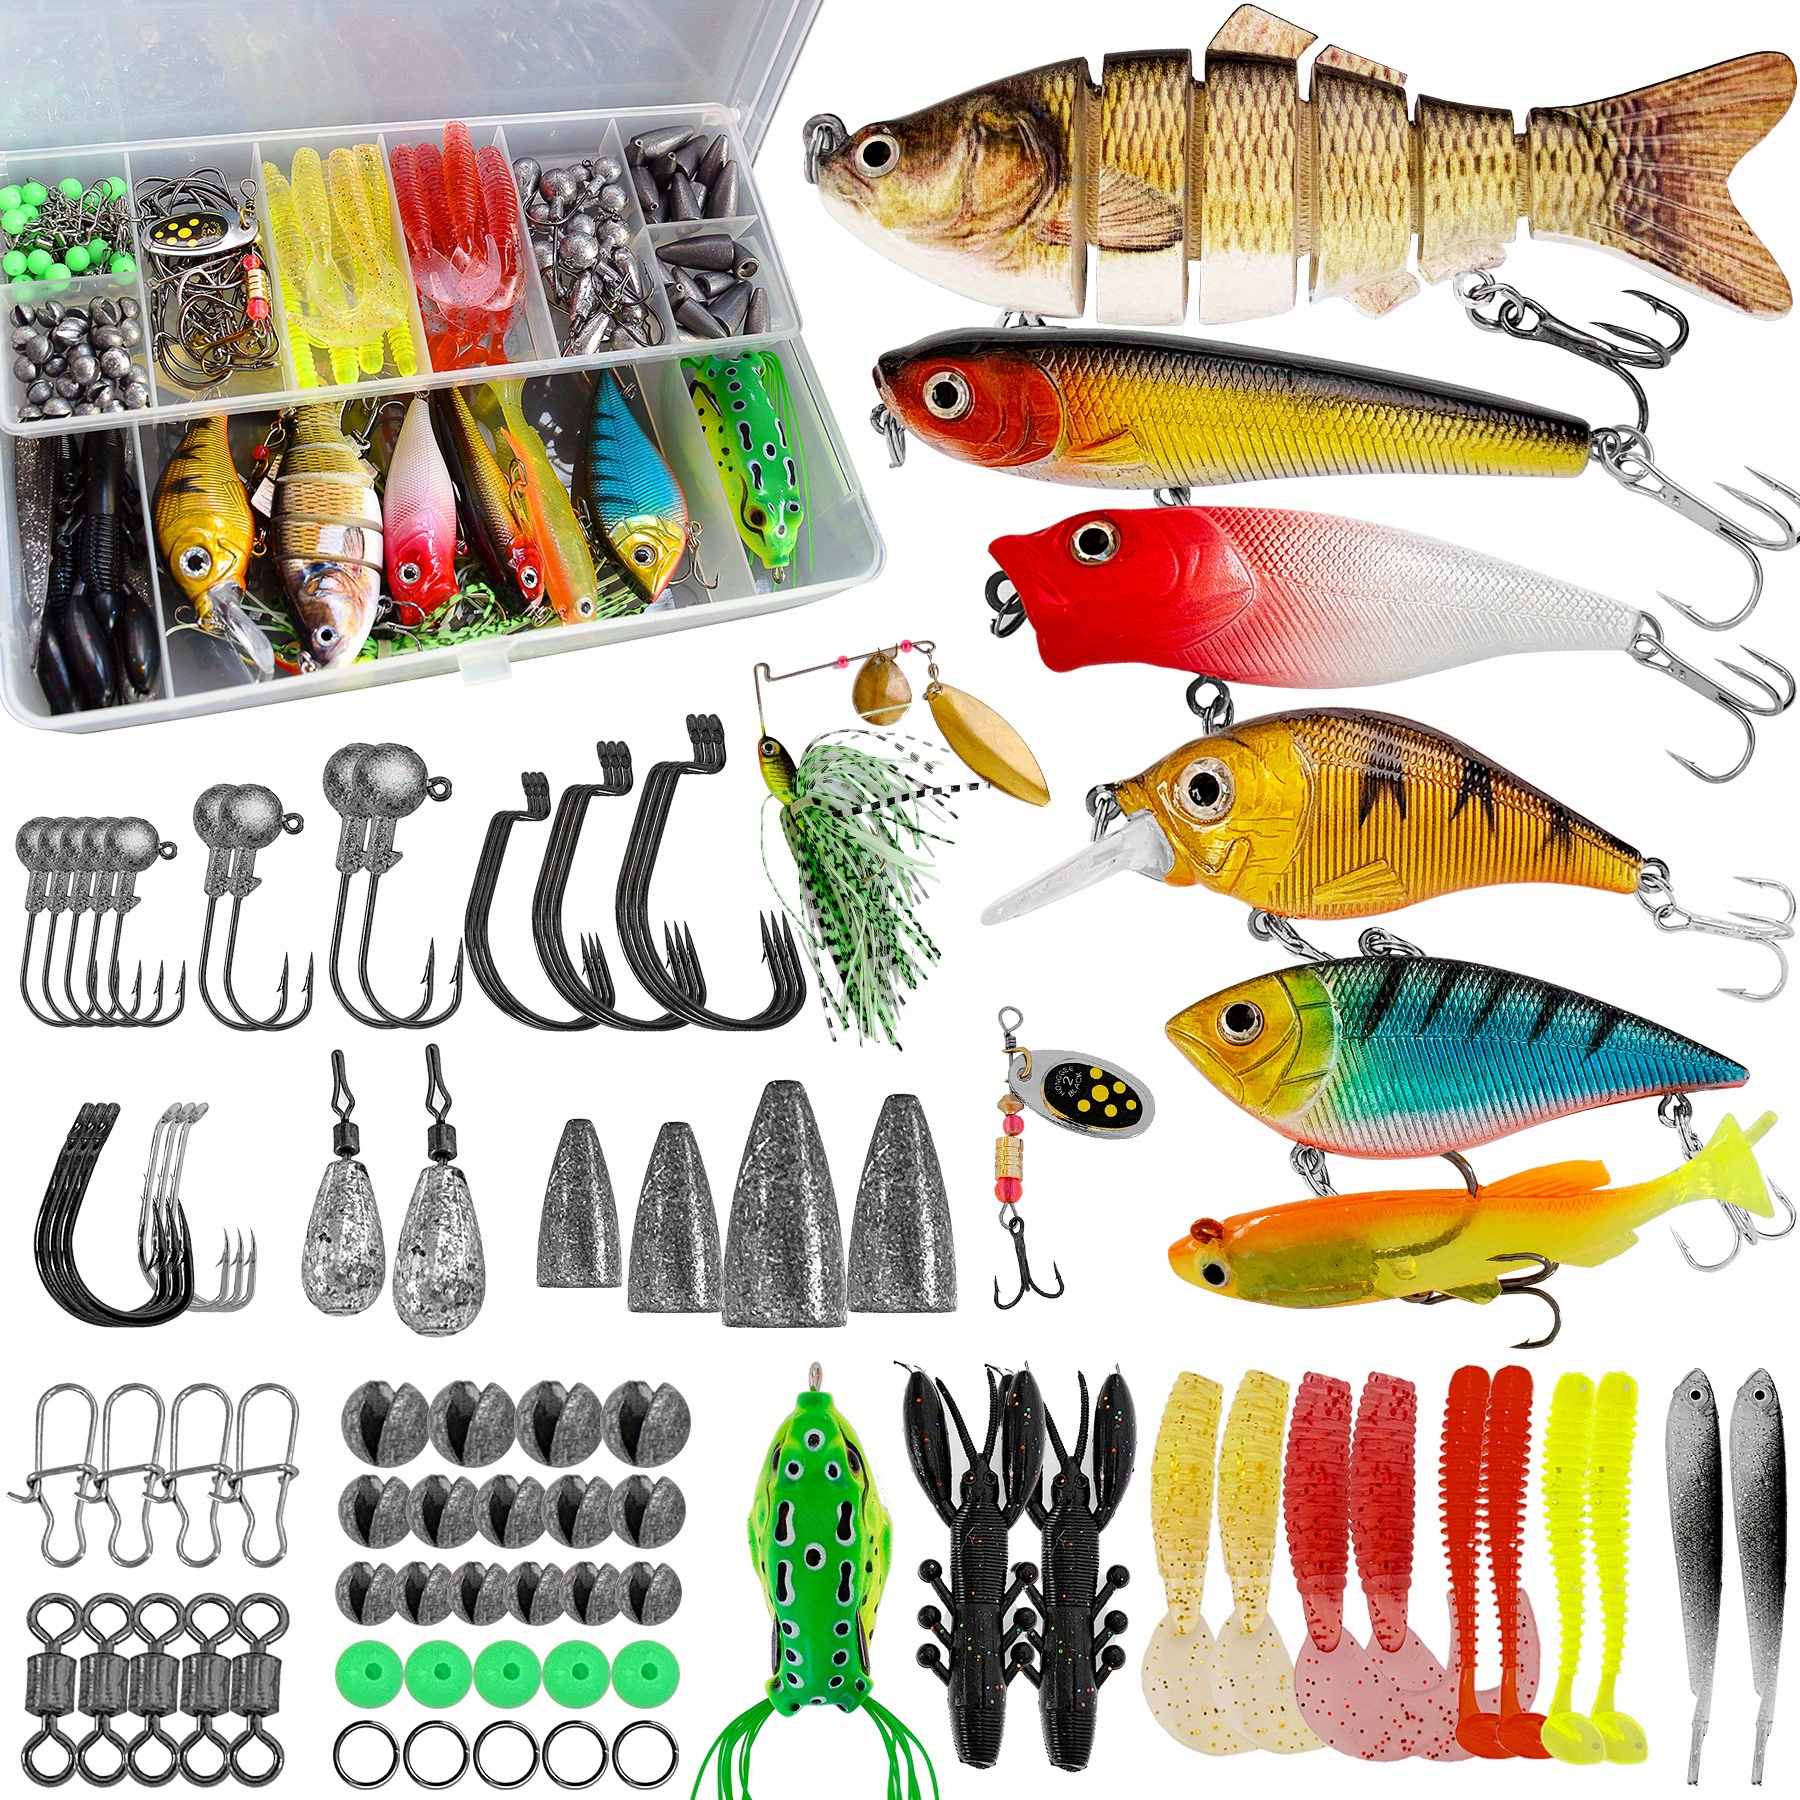  TCMBY 327PCS Fishing Lures Tackle Bait Kit Set for